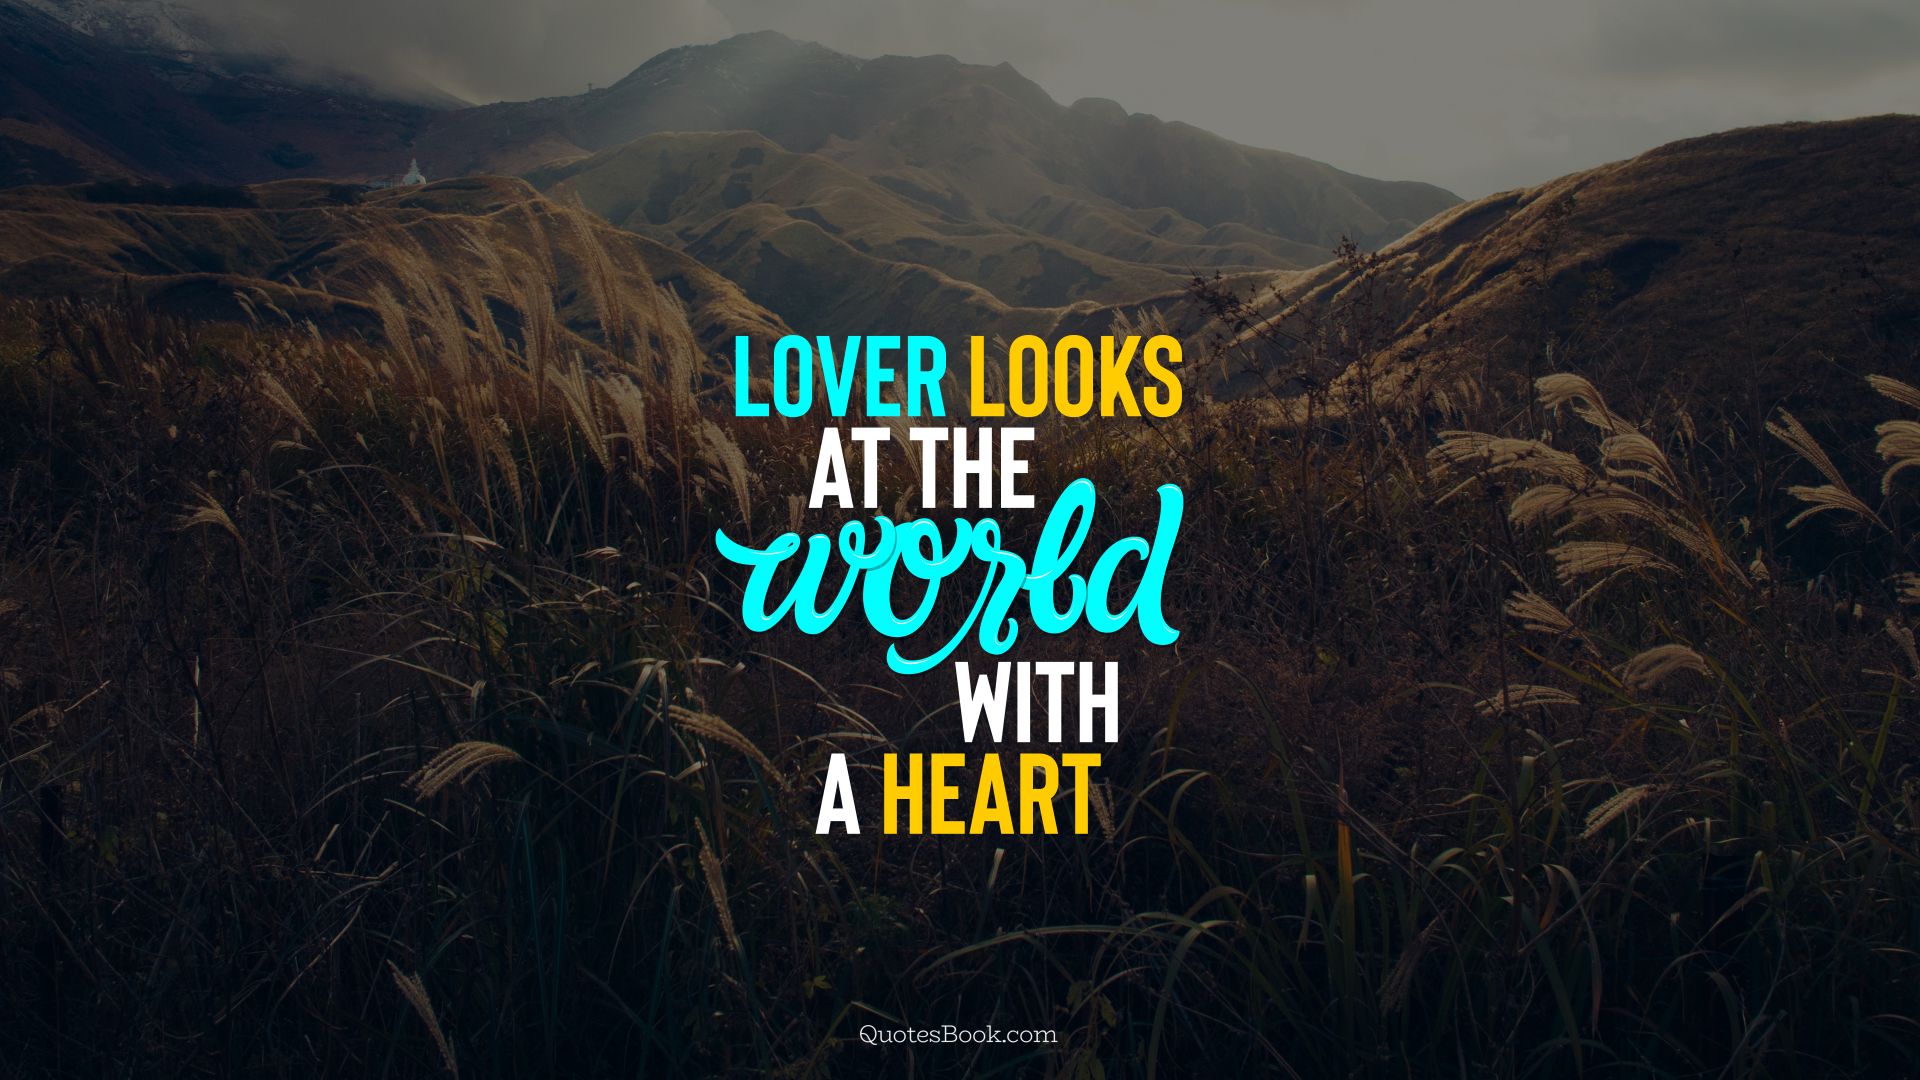 Lover looks at the world with a heart. - Quote by QuotesBook